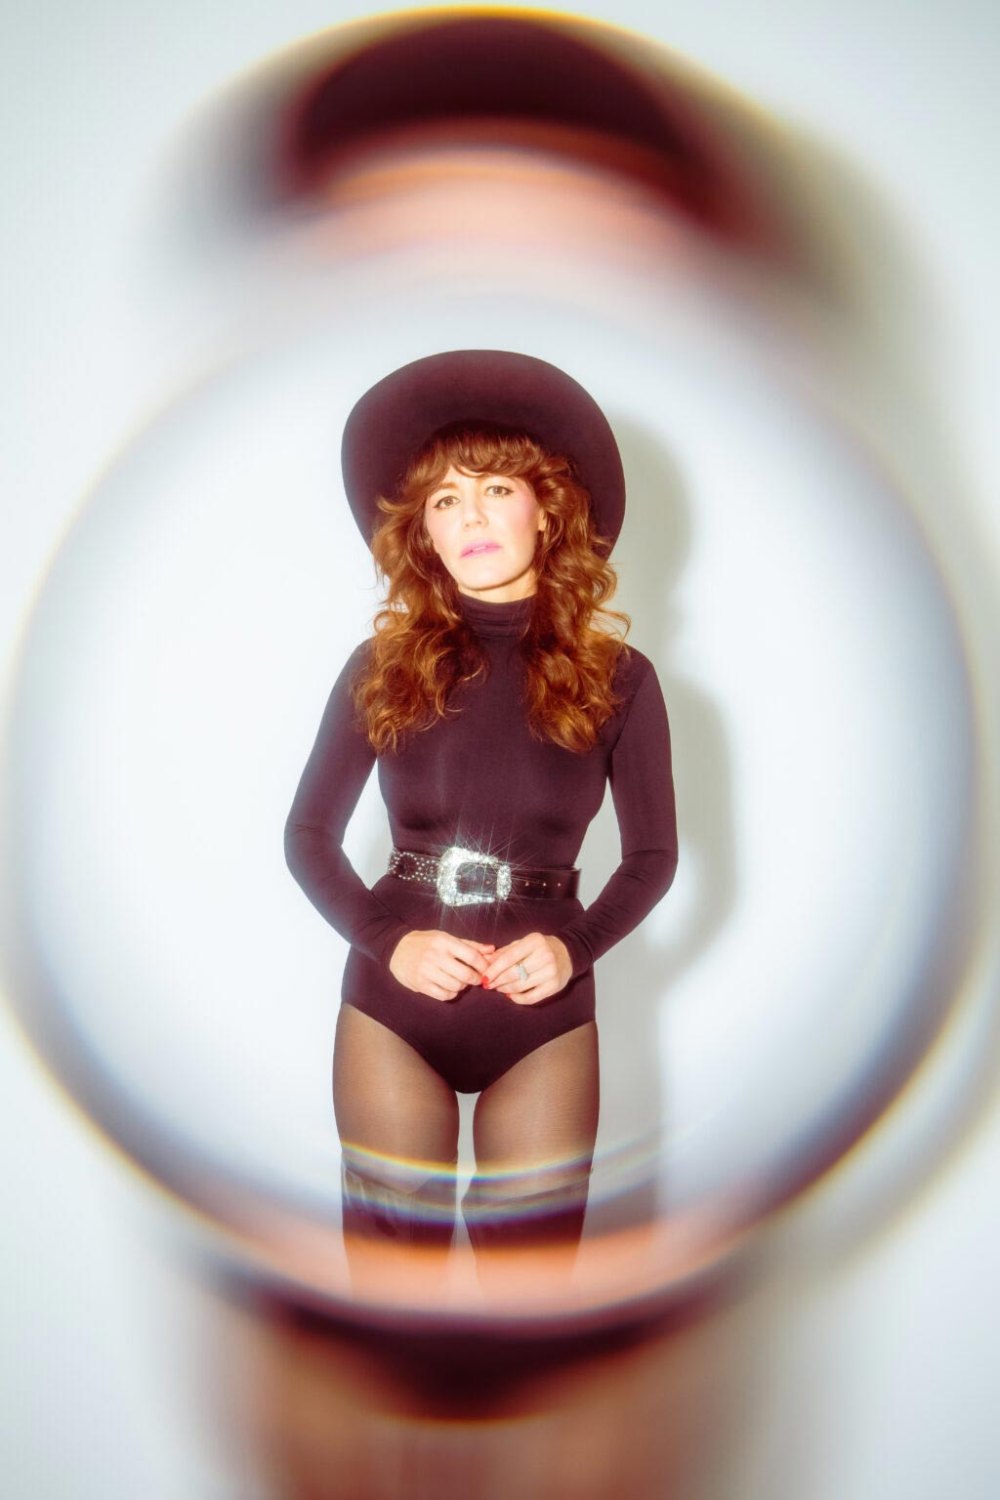 Former Child Star Jenny Lewis Has No Regrets About Leaving Acting Behind to Pursue a Music Career